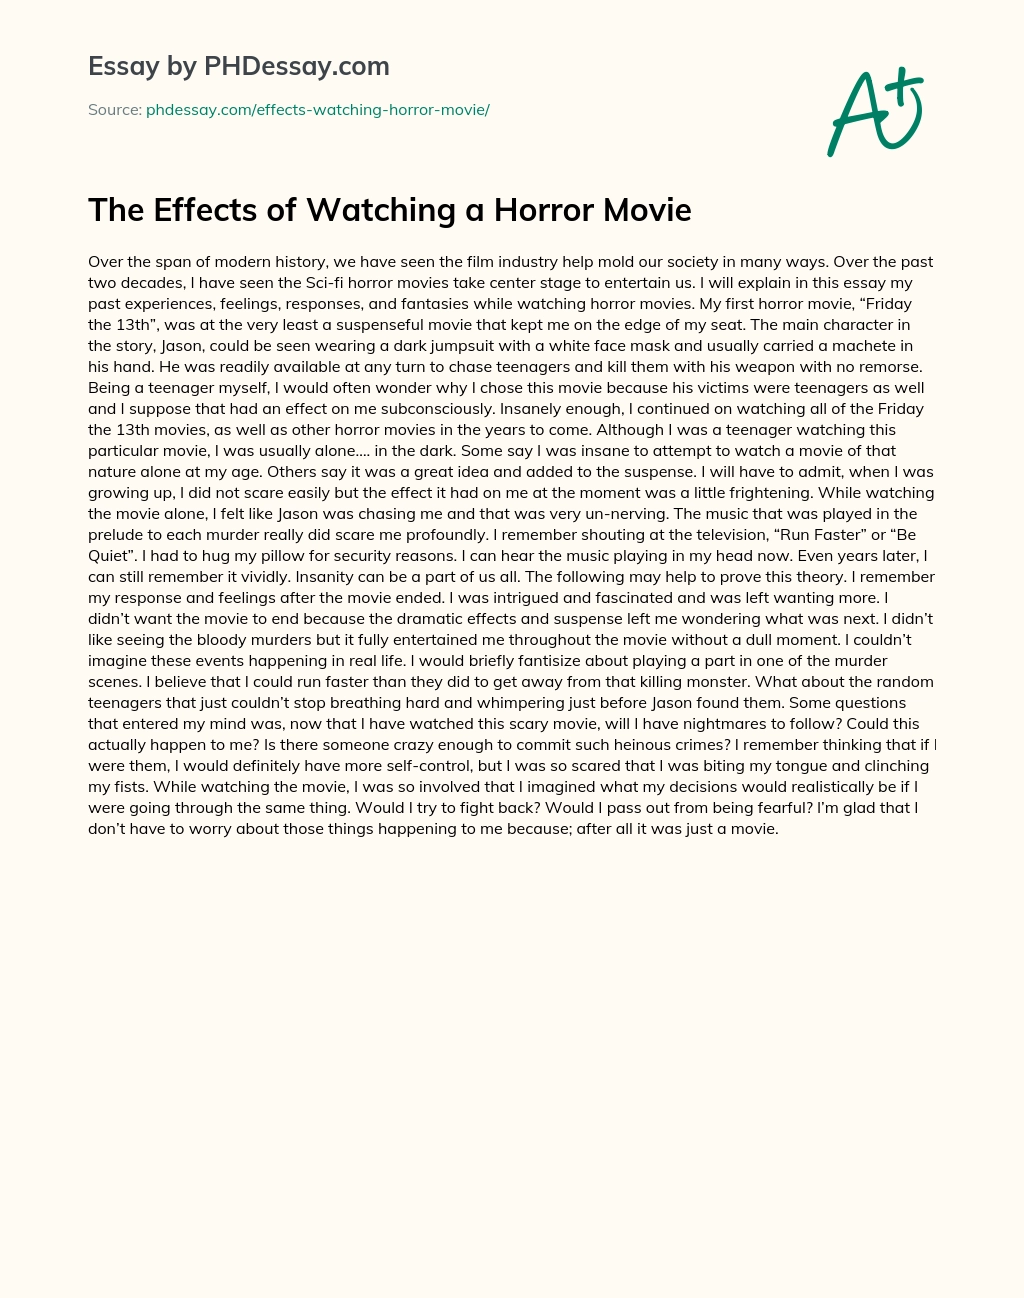 The Effects of Watching a Horror Movie essay